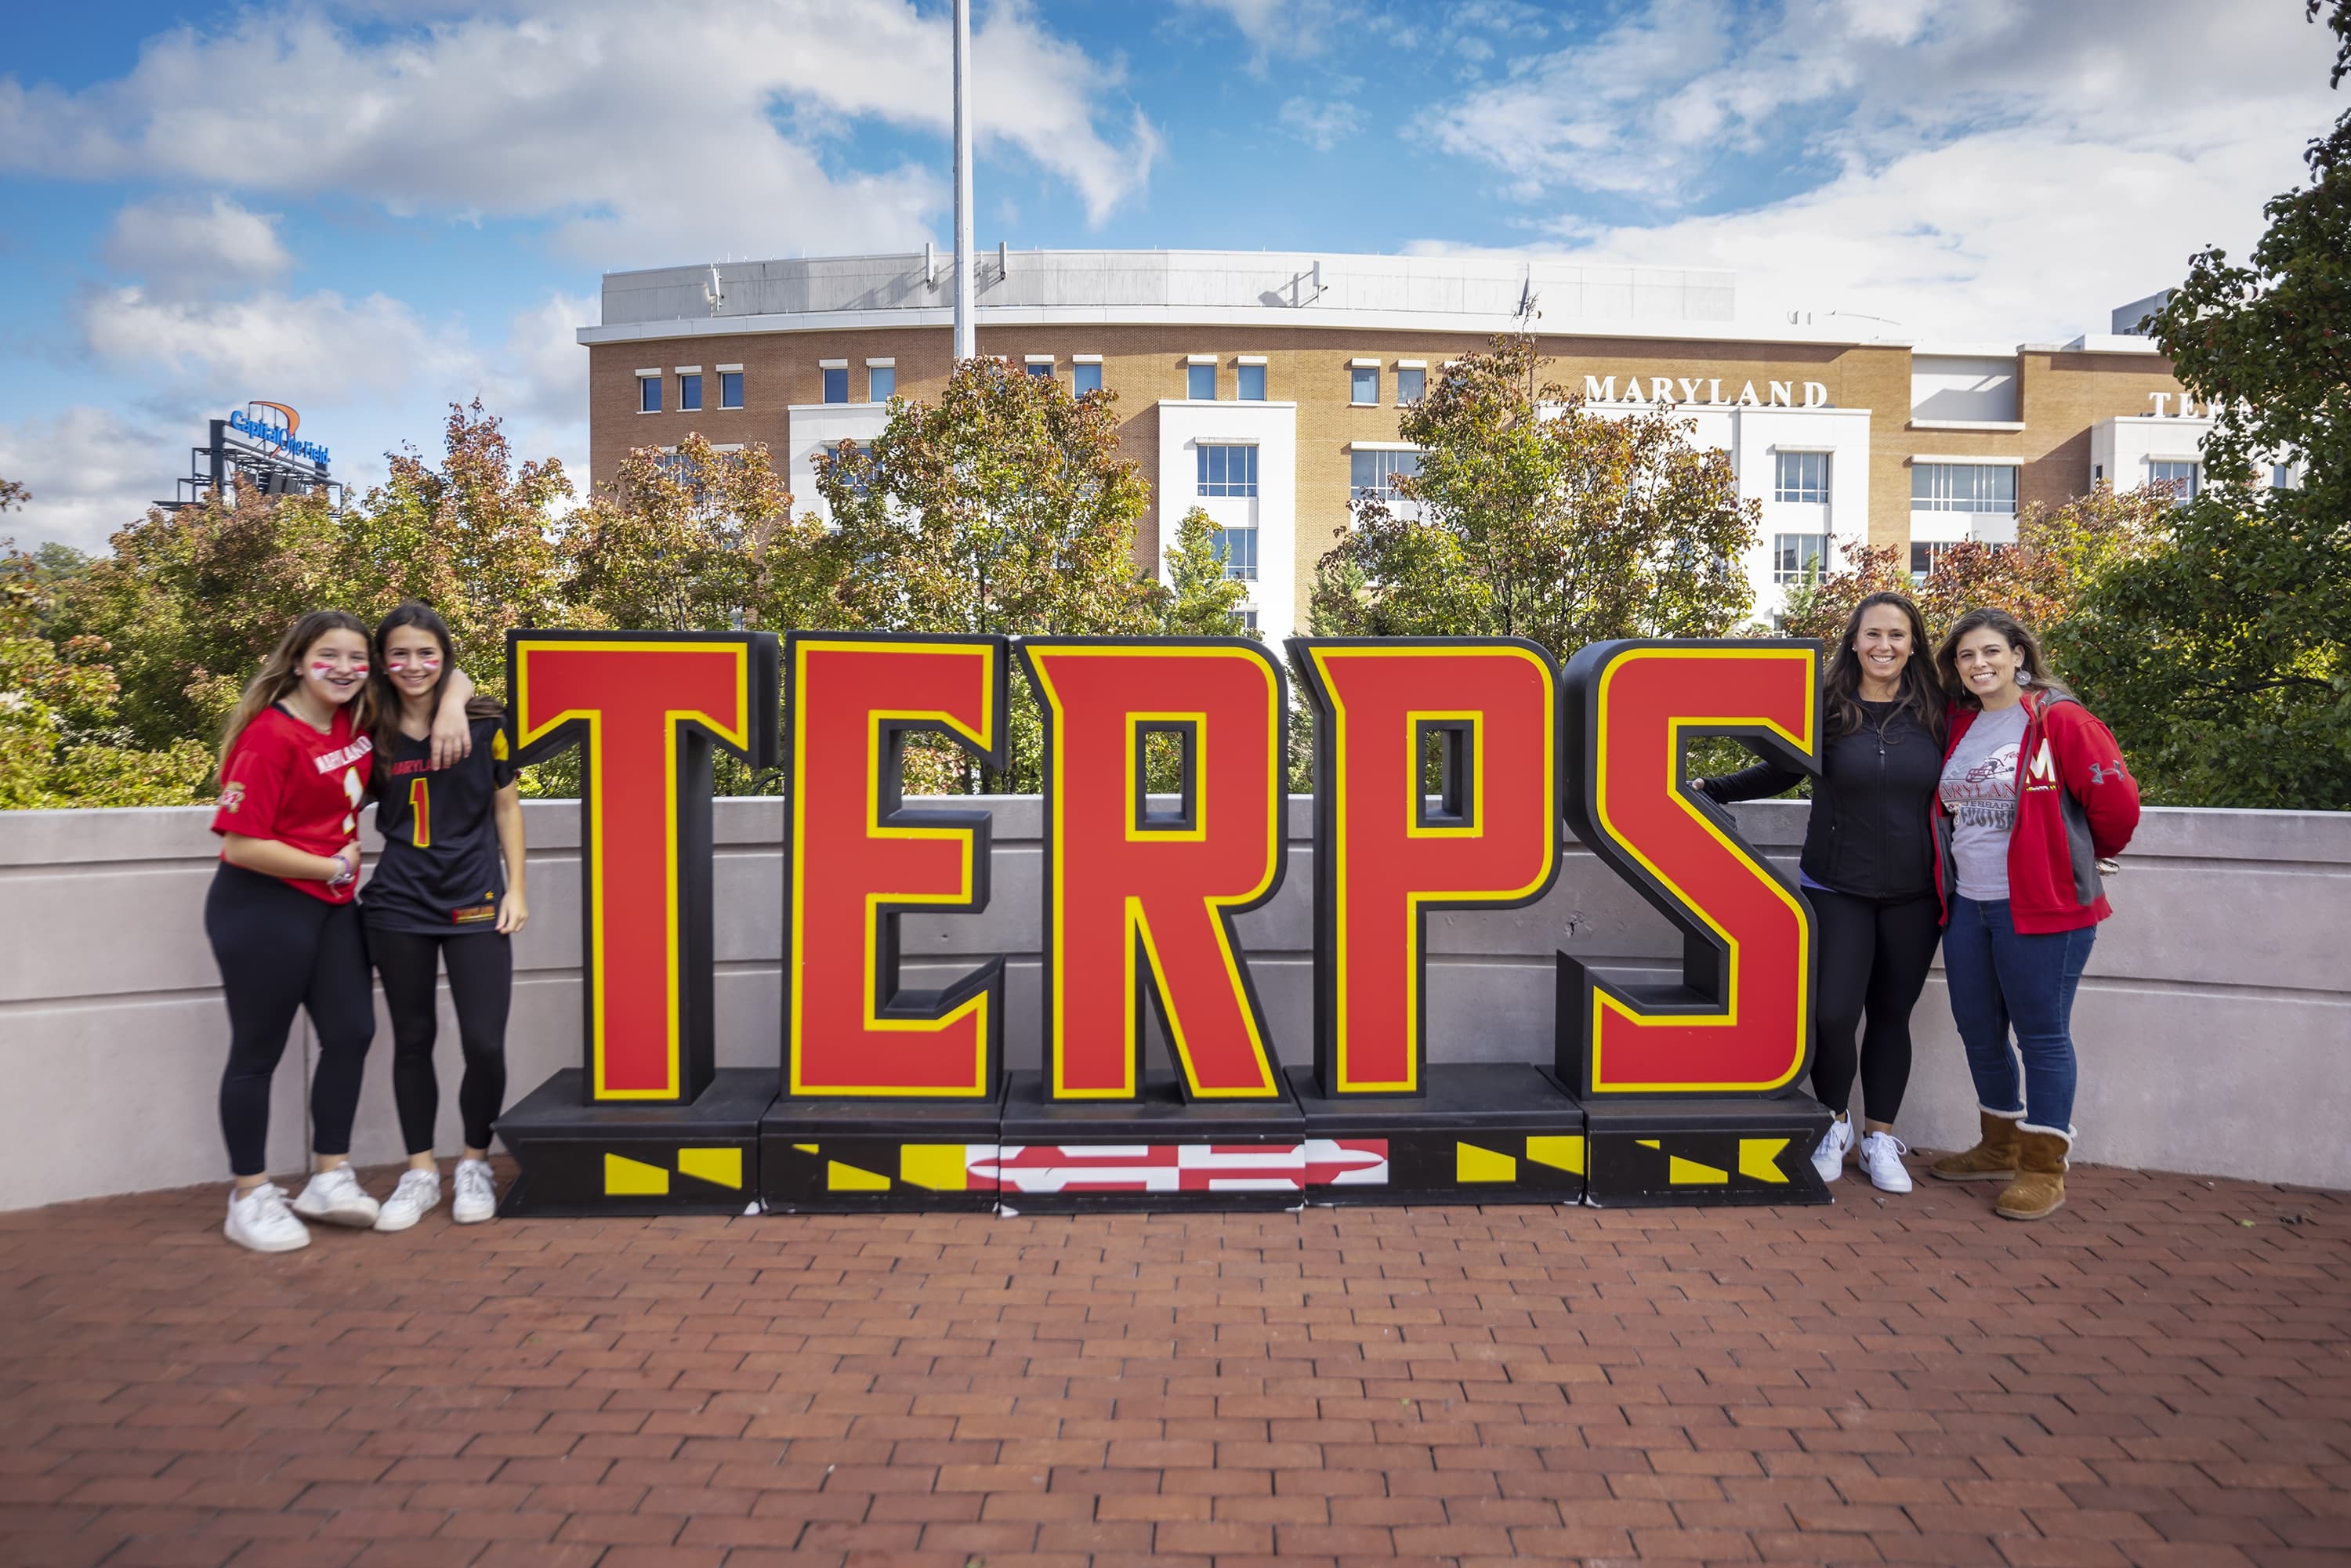 Students standing in front of oversized sign that says TERPS